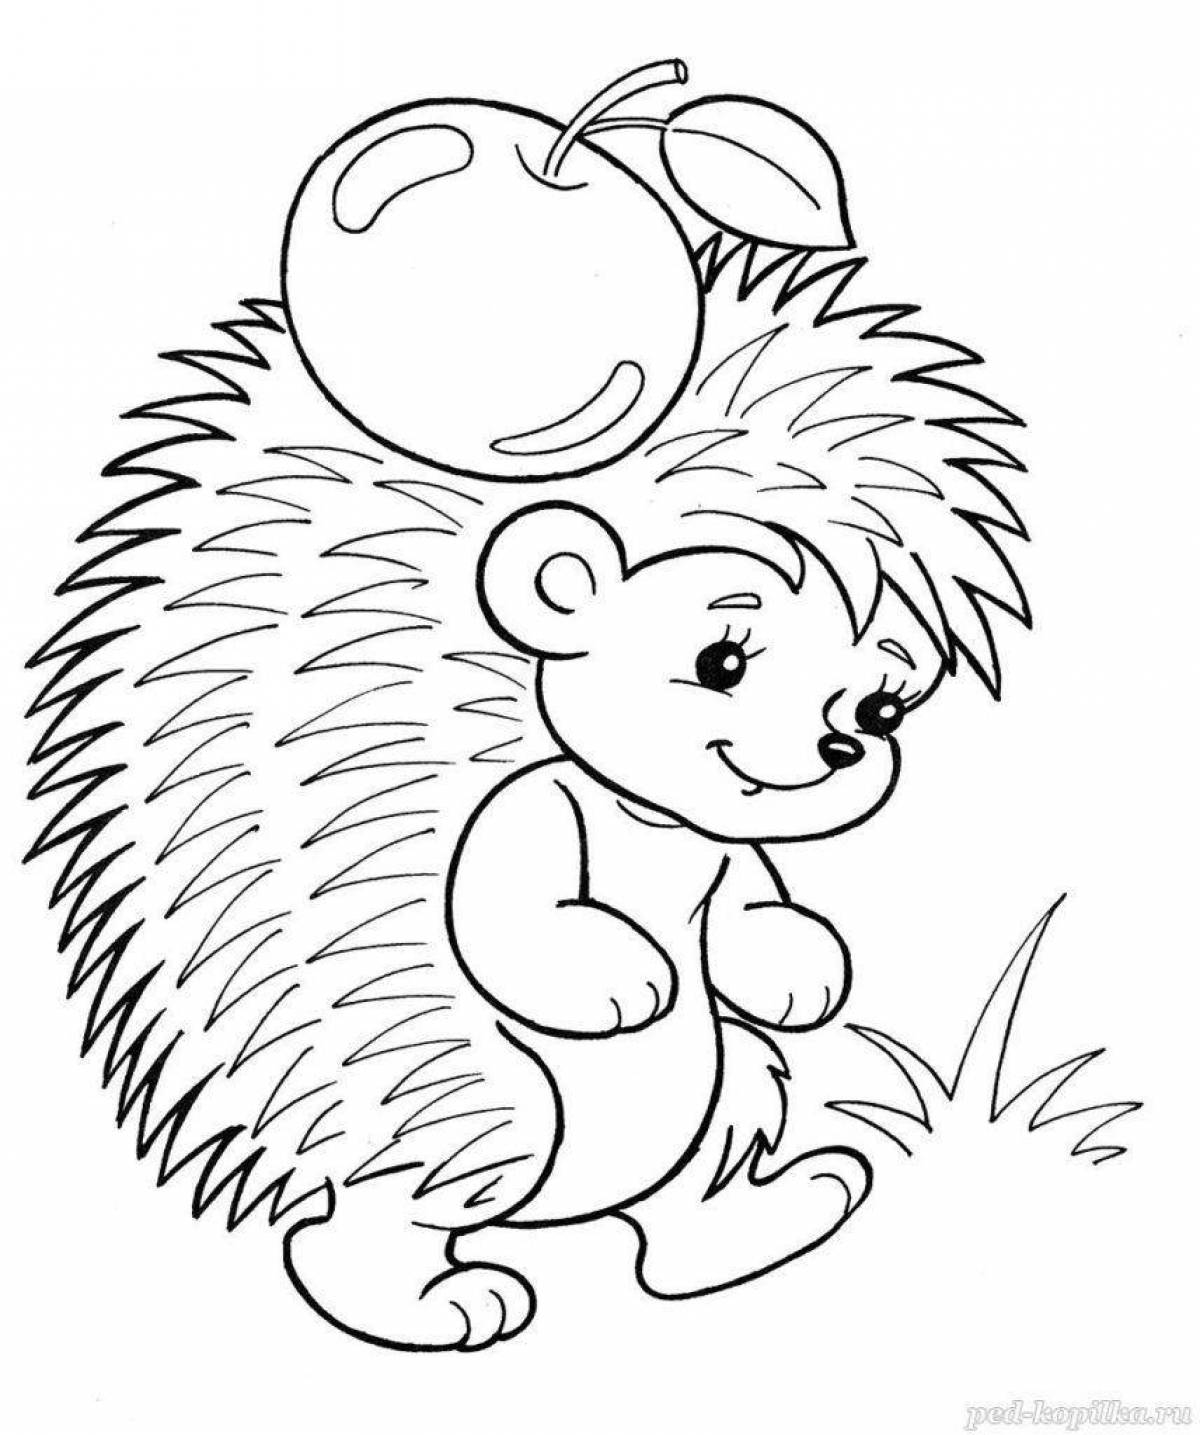 Blissful hedgehog and teddy bear coloring book